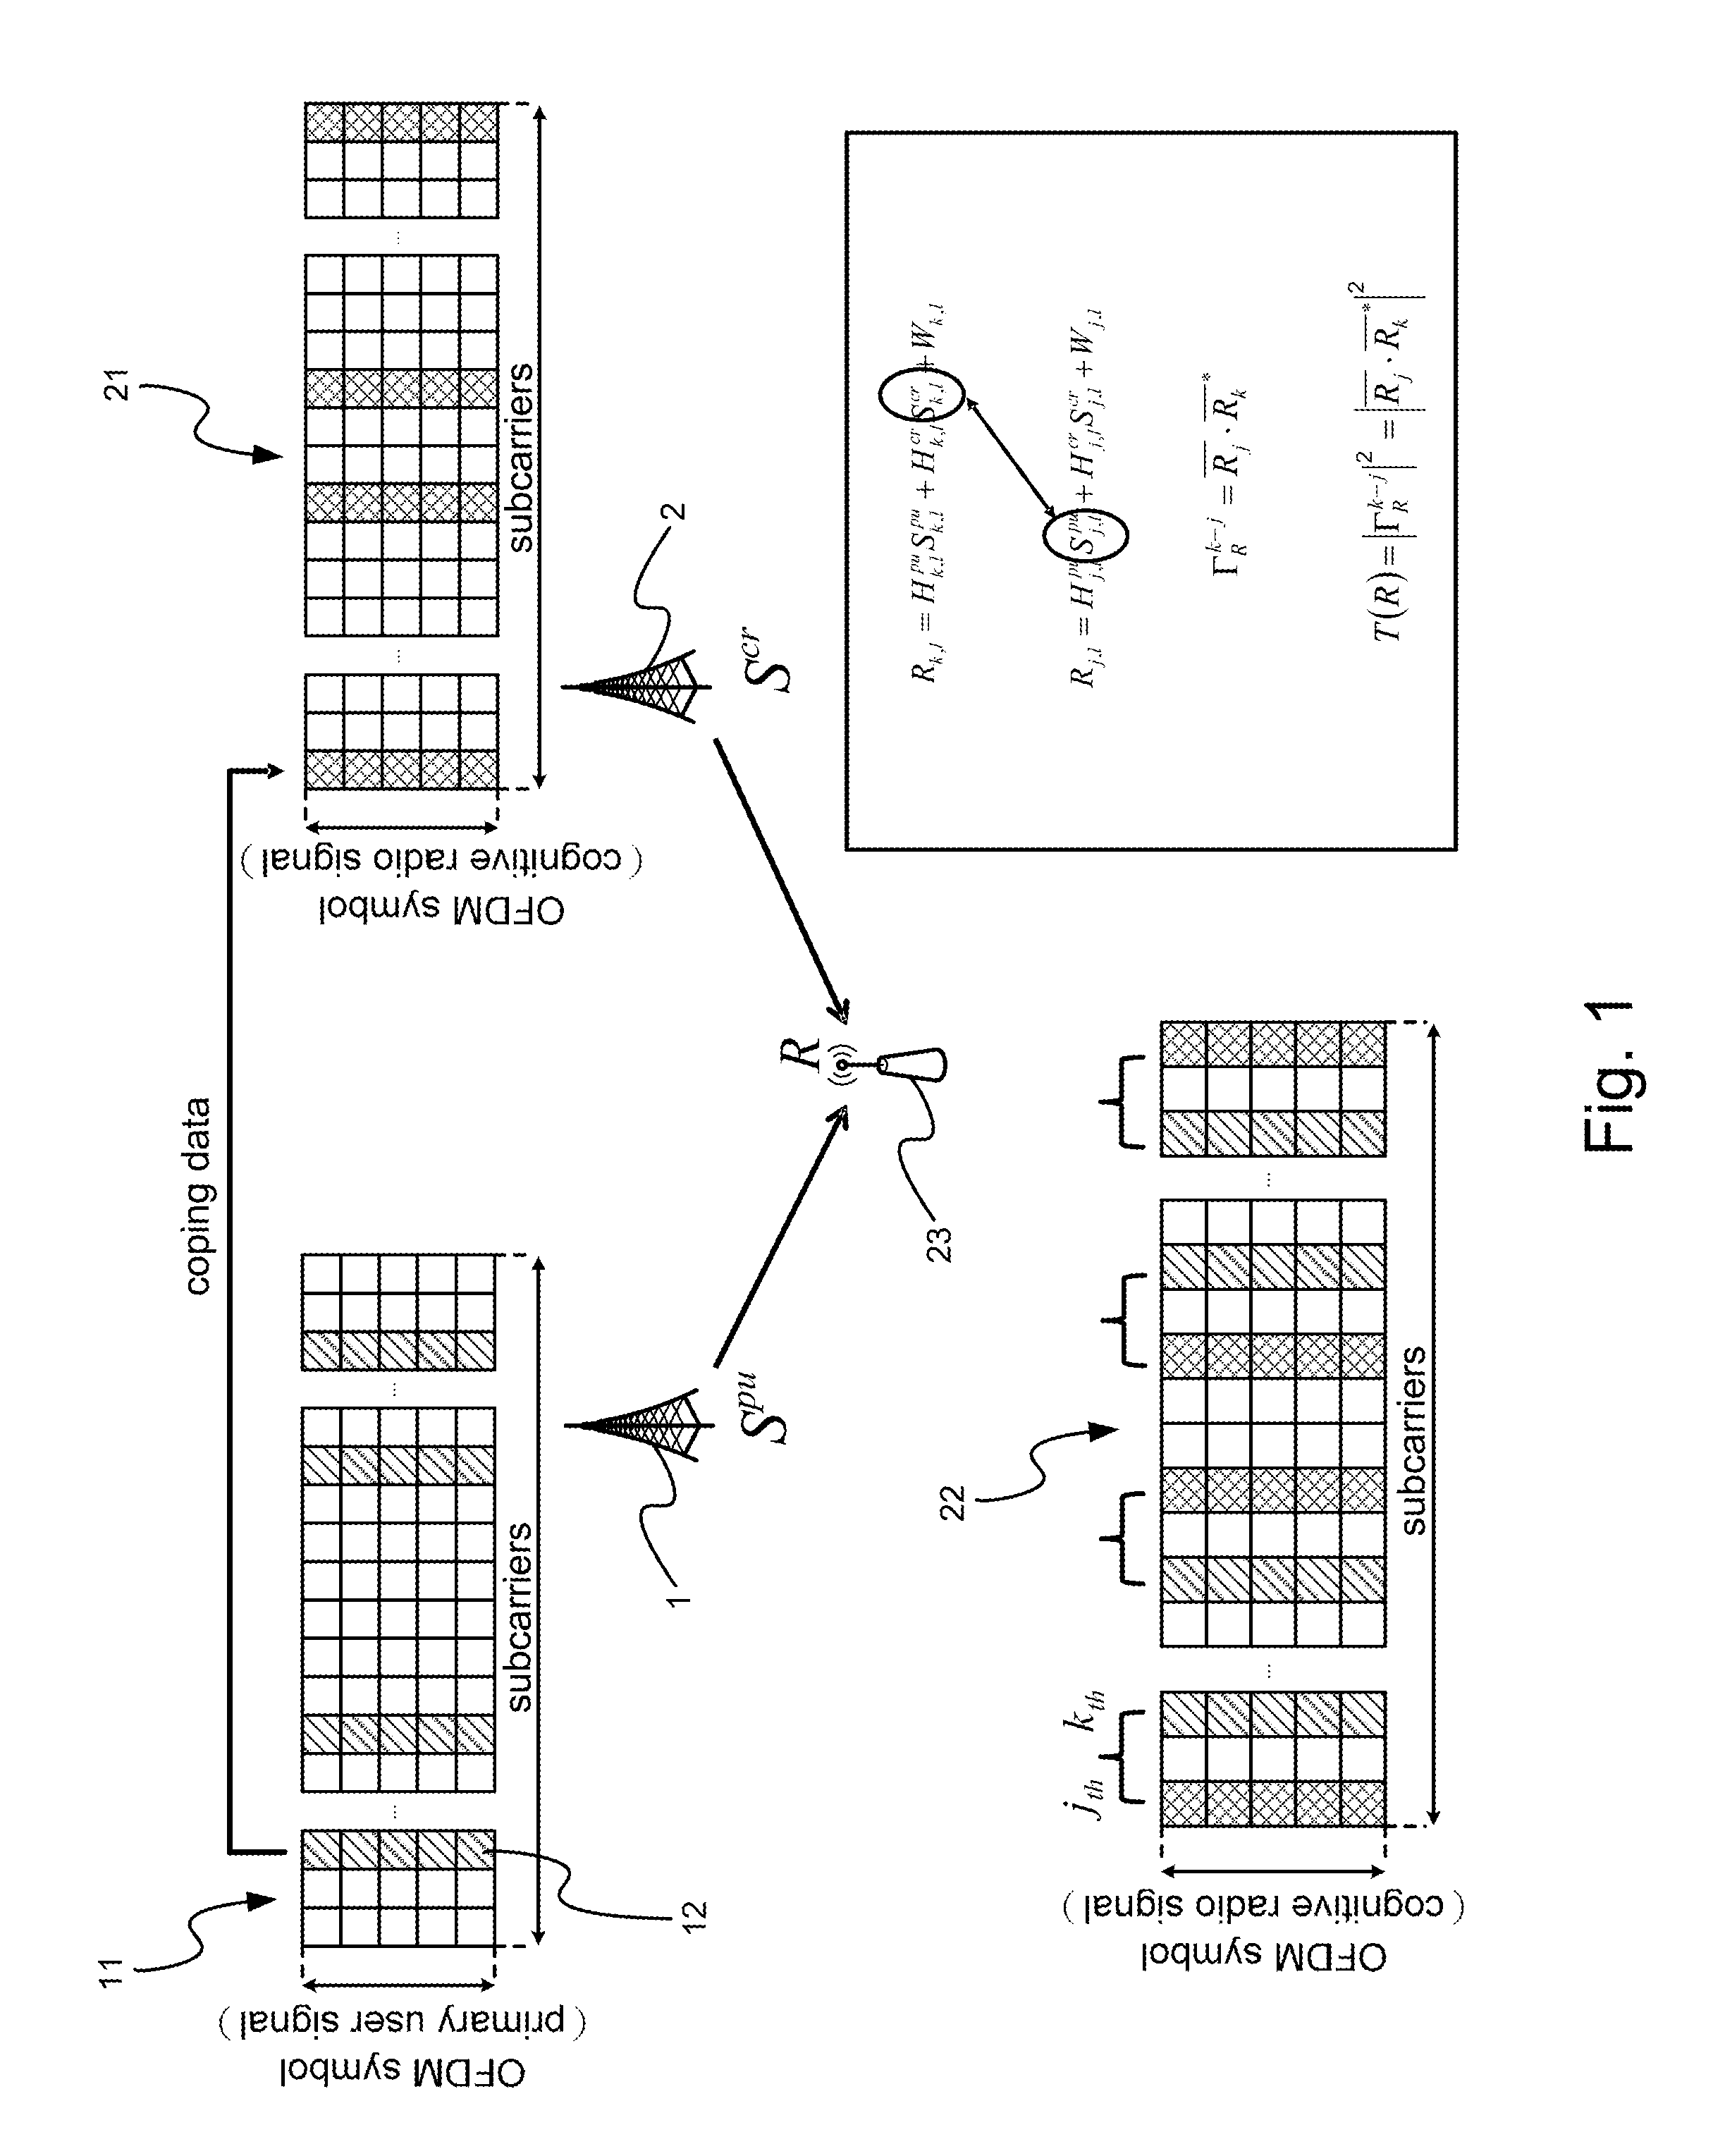 Active sensing method based on spectral correlation for cognitive radio systems